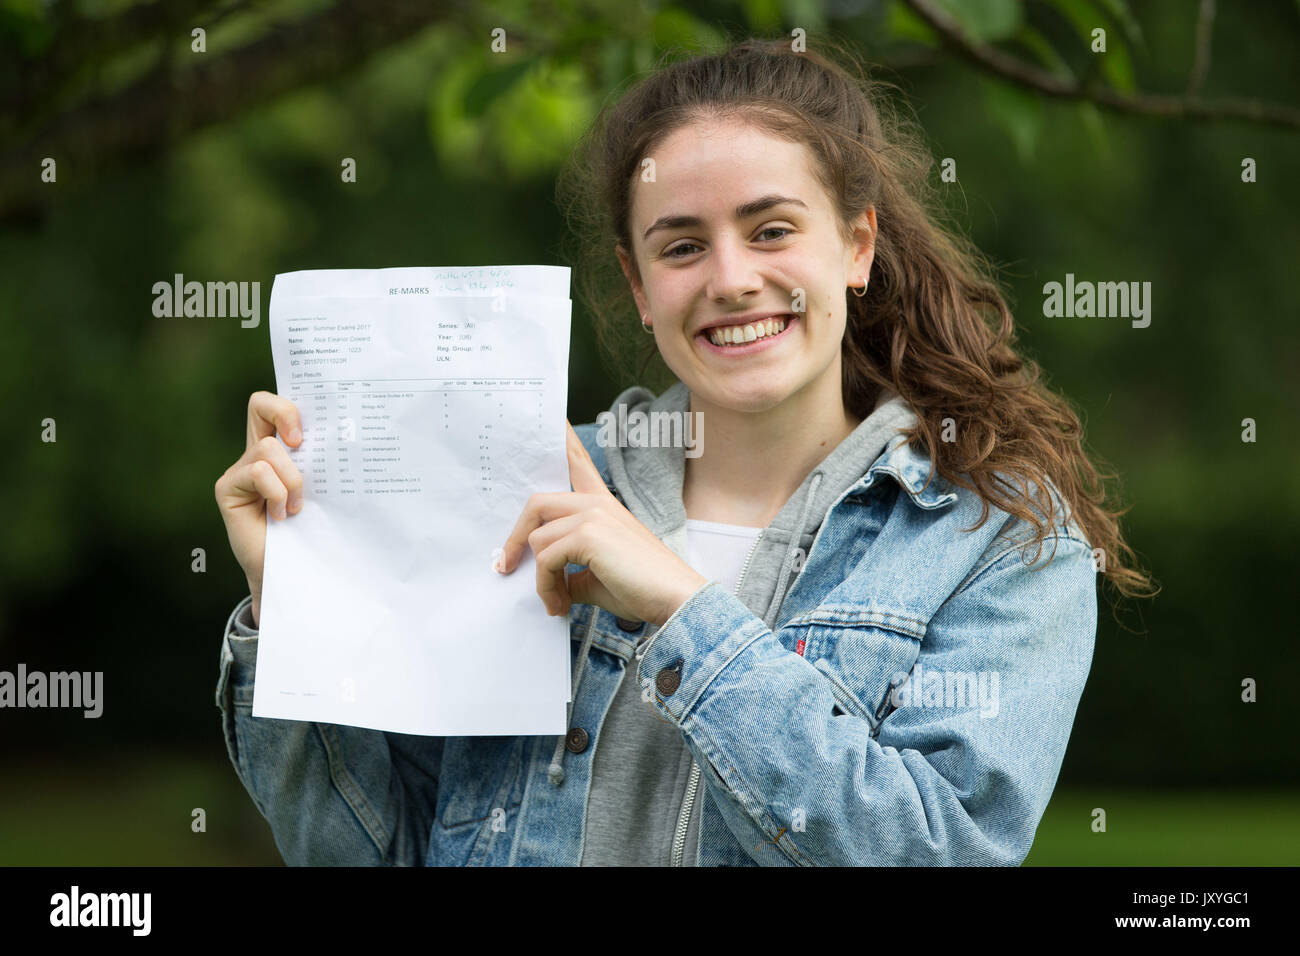 RETRANSMISSION CLARIFYING WHICH TEAM ALICE PLAYS NETBALL FOR Alice Coward, 1A and 2Bs, who will be attending Nottingham University to study medicine and who is a member of the Wasps Netball team in Coventry U19s, celebrates her A Level results from the King Edwards VI High School for Girls Edgbaston, Birmingham. Stock Photo